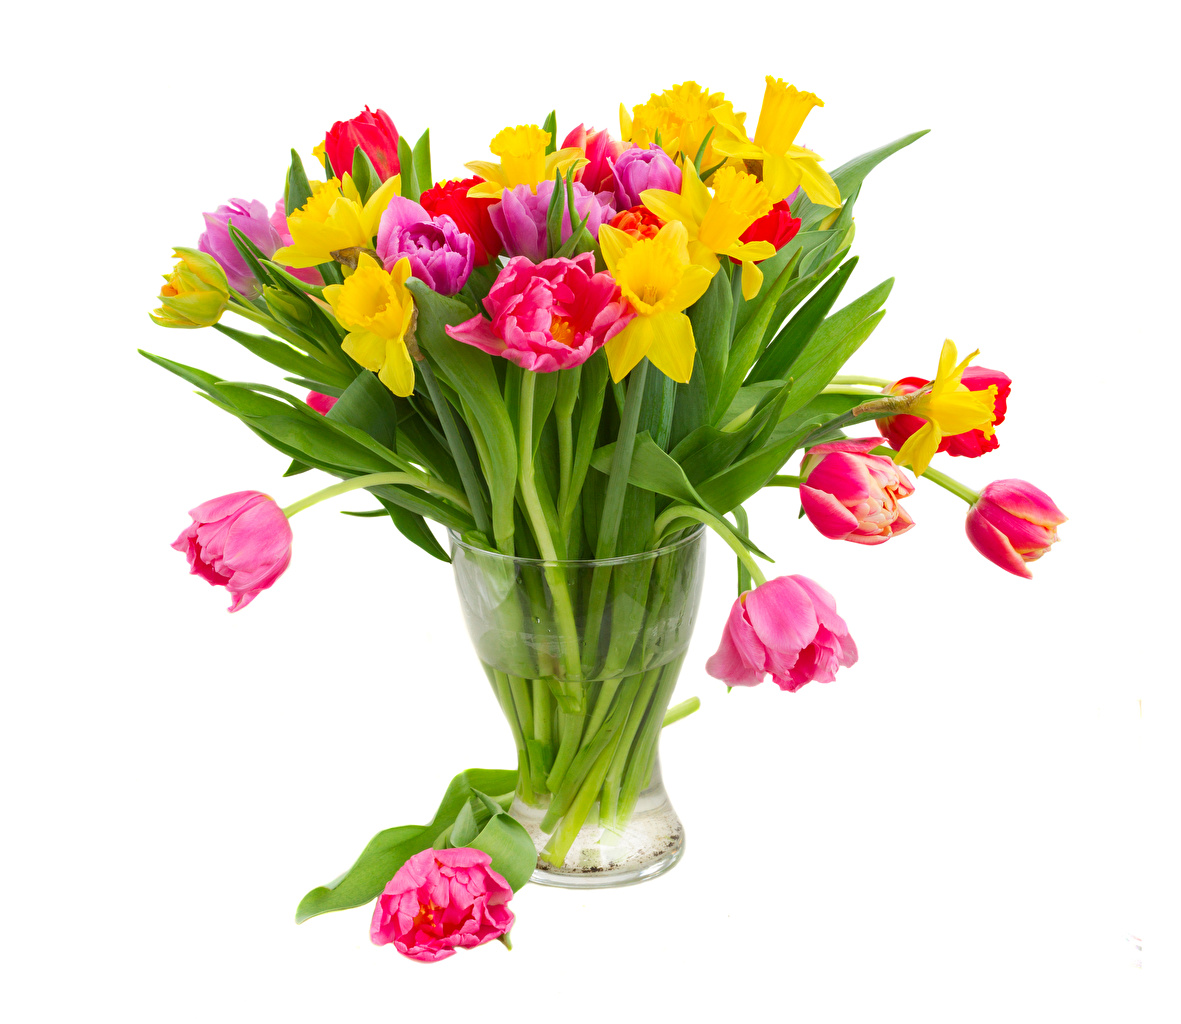 Bouquets Tulips Daffodils White background Vase 519000 1181x1024